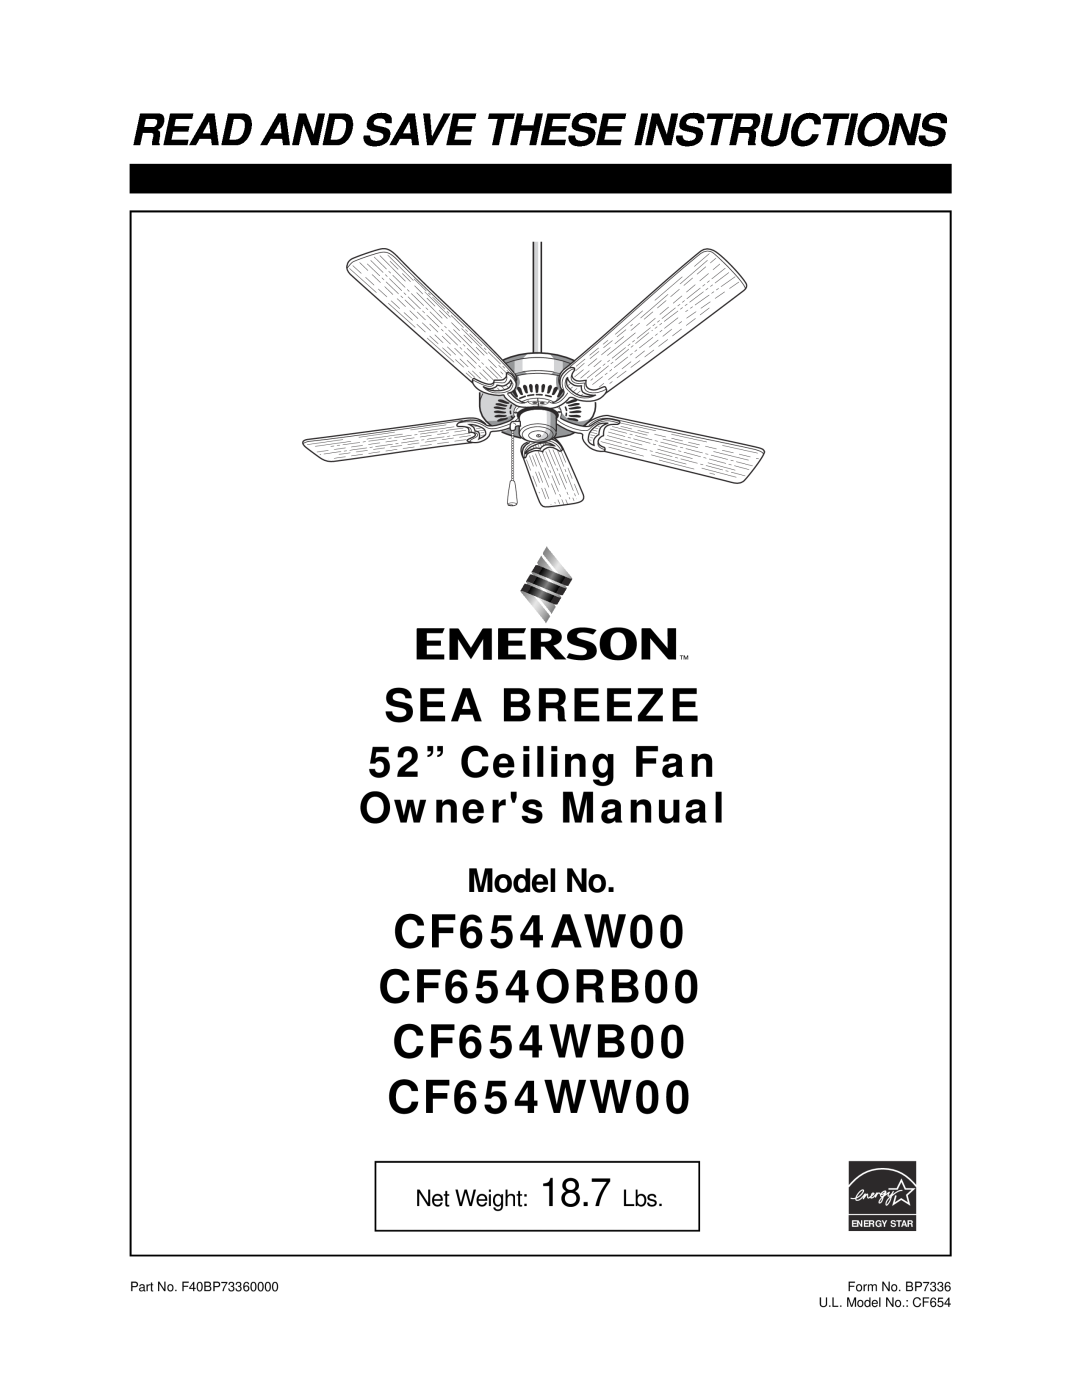 Emerson owner manual Wet Location, CF654AW00 CF654OB00 CF654ORB00 CF654WB00 CF654WW00, Read And Save These Instructions 